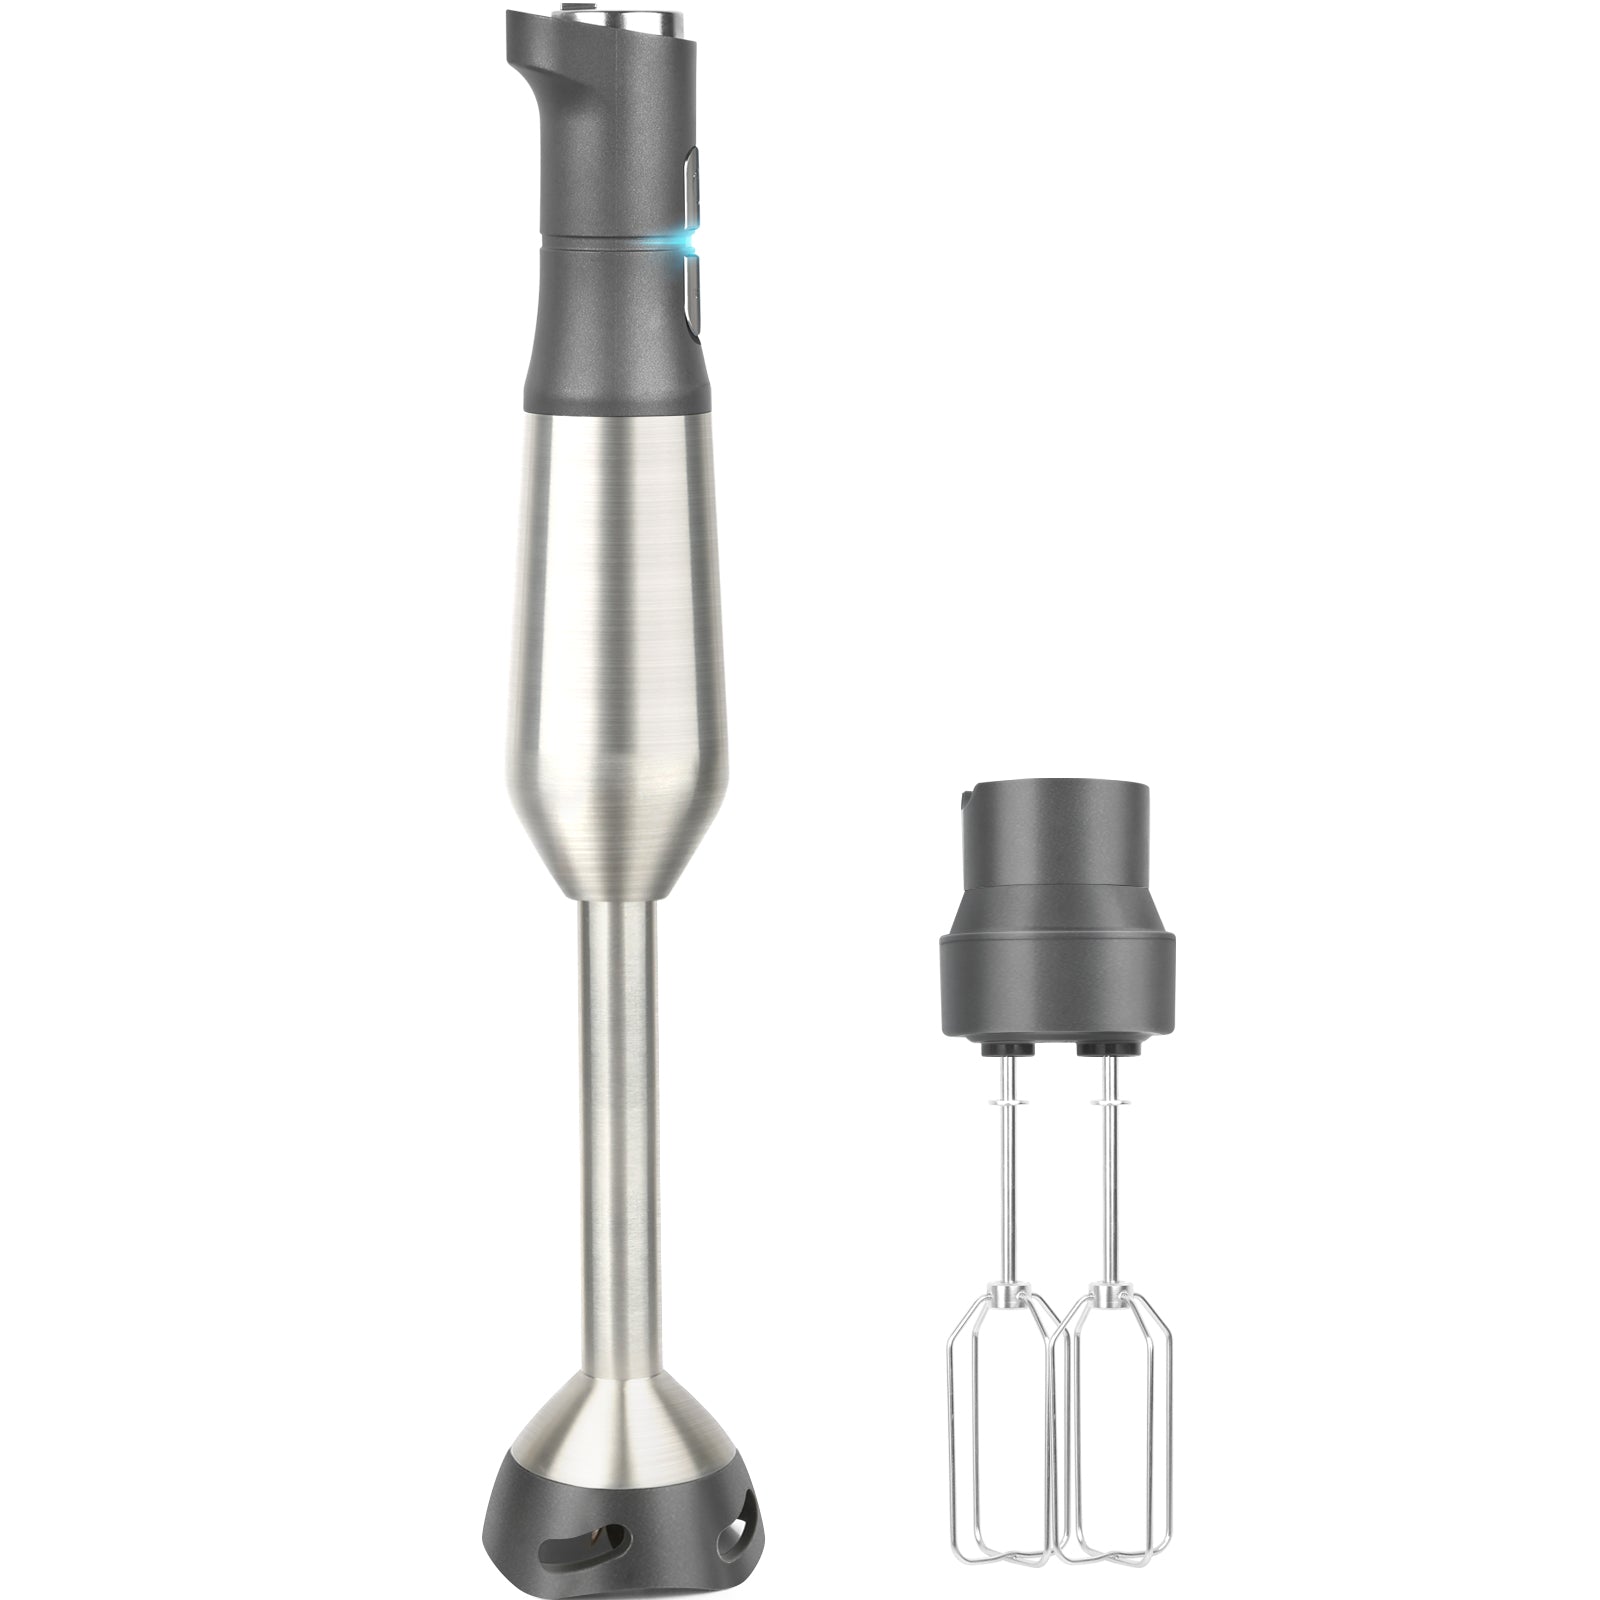 DeLonghi MultiQuick 7 Hand Blender in Black and Stainless Steel